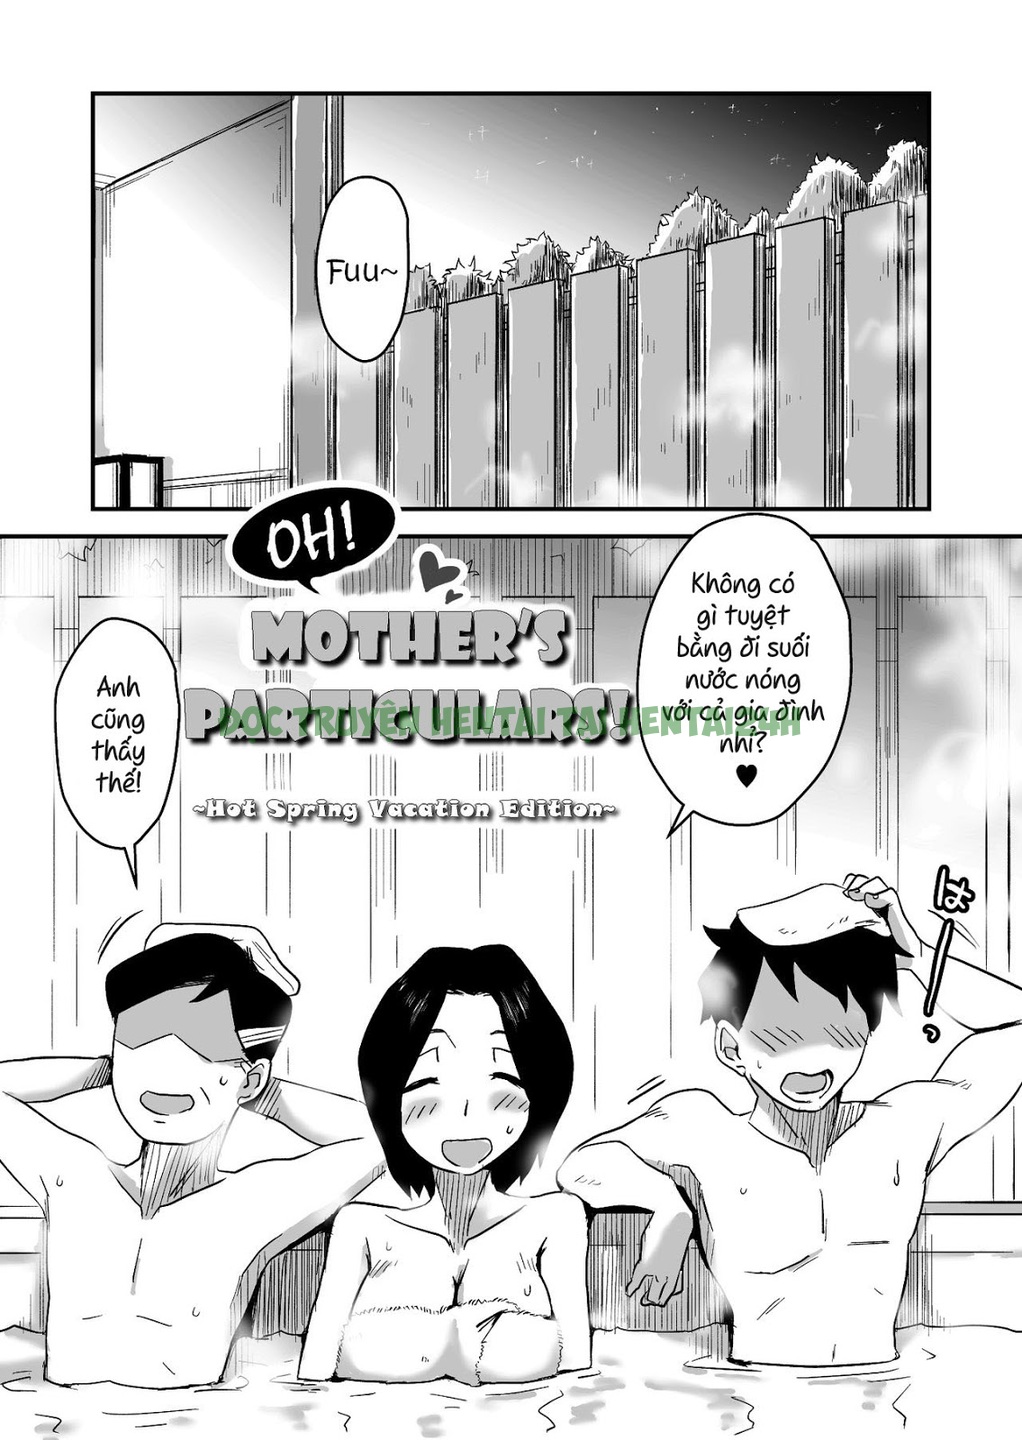 Xem ảnh Oh! Mother’s Particulars! – Hot Spring Vacation Edition - Chapter 1 - 1 - Hentai24h.Tv